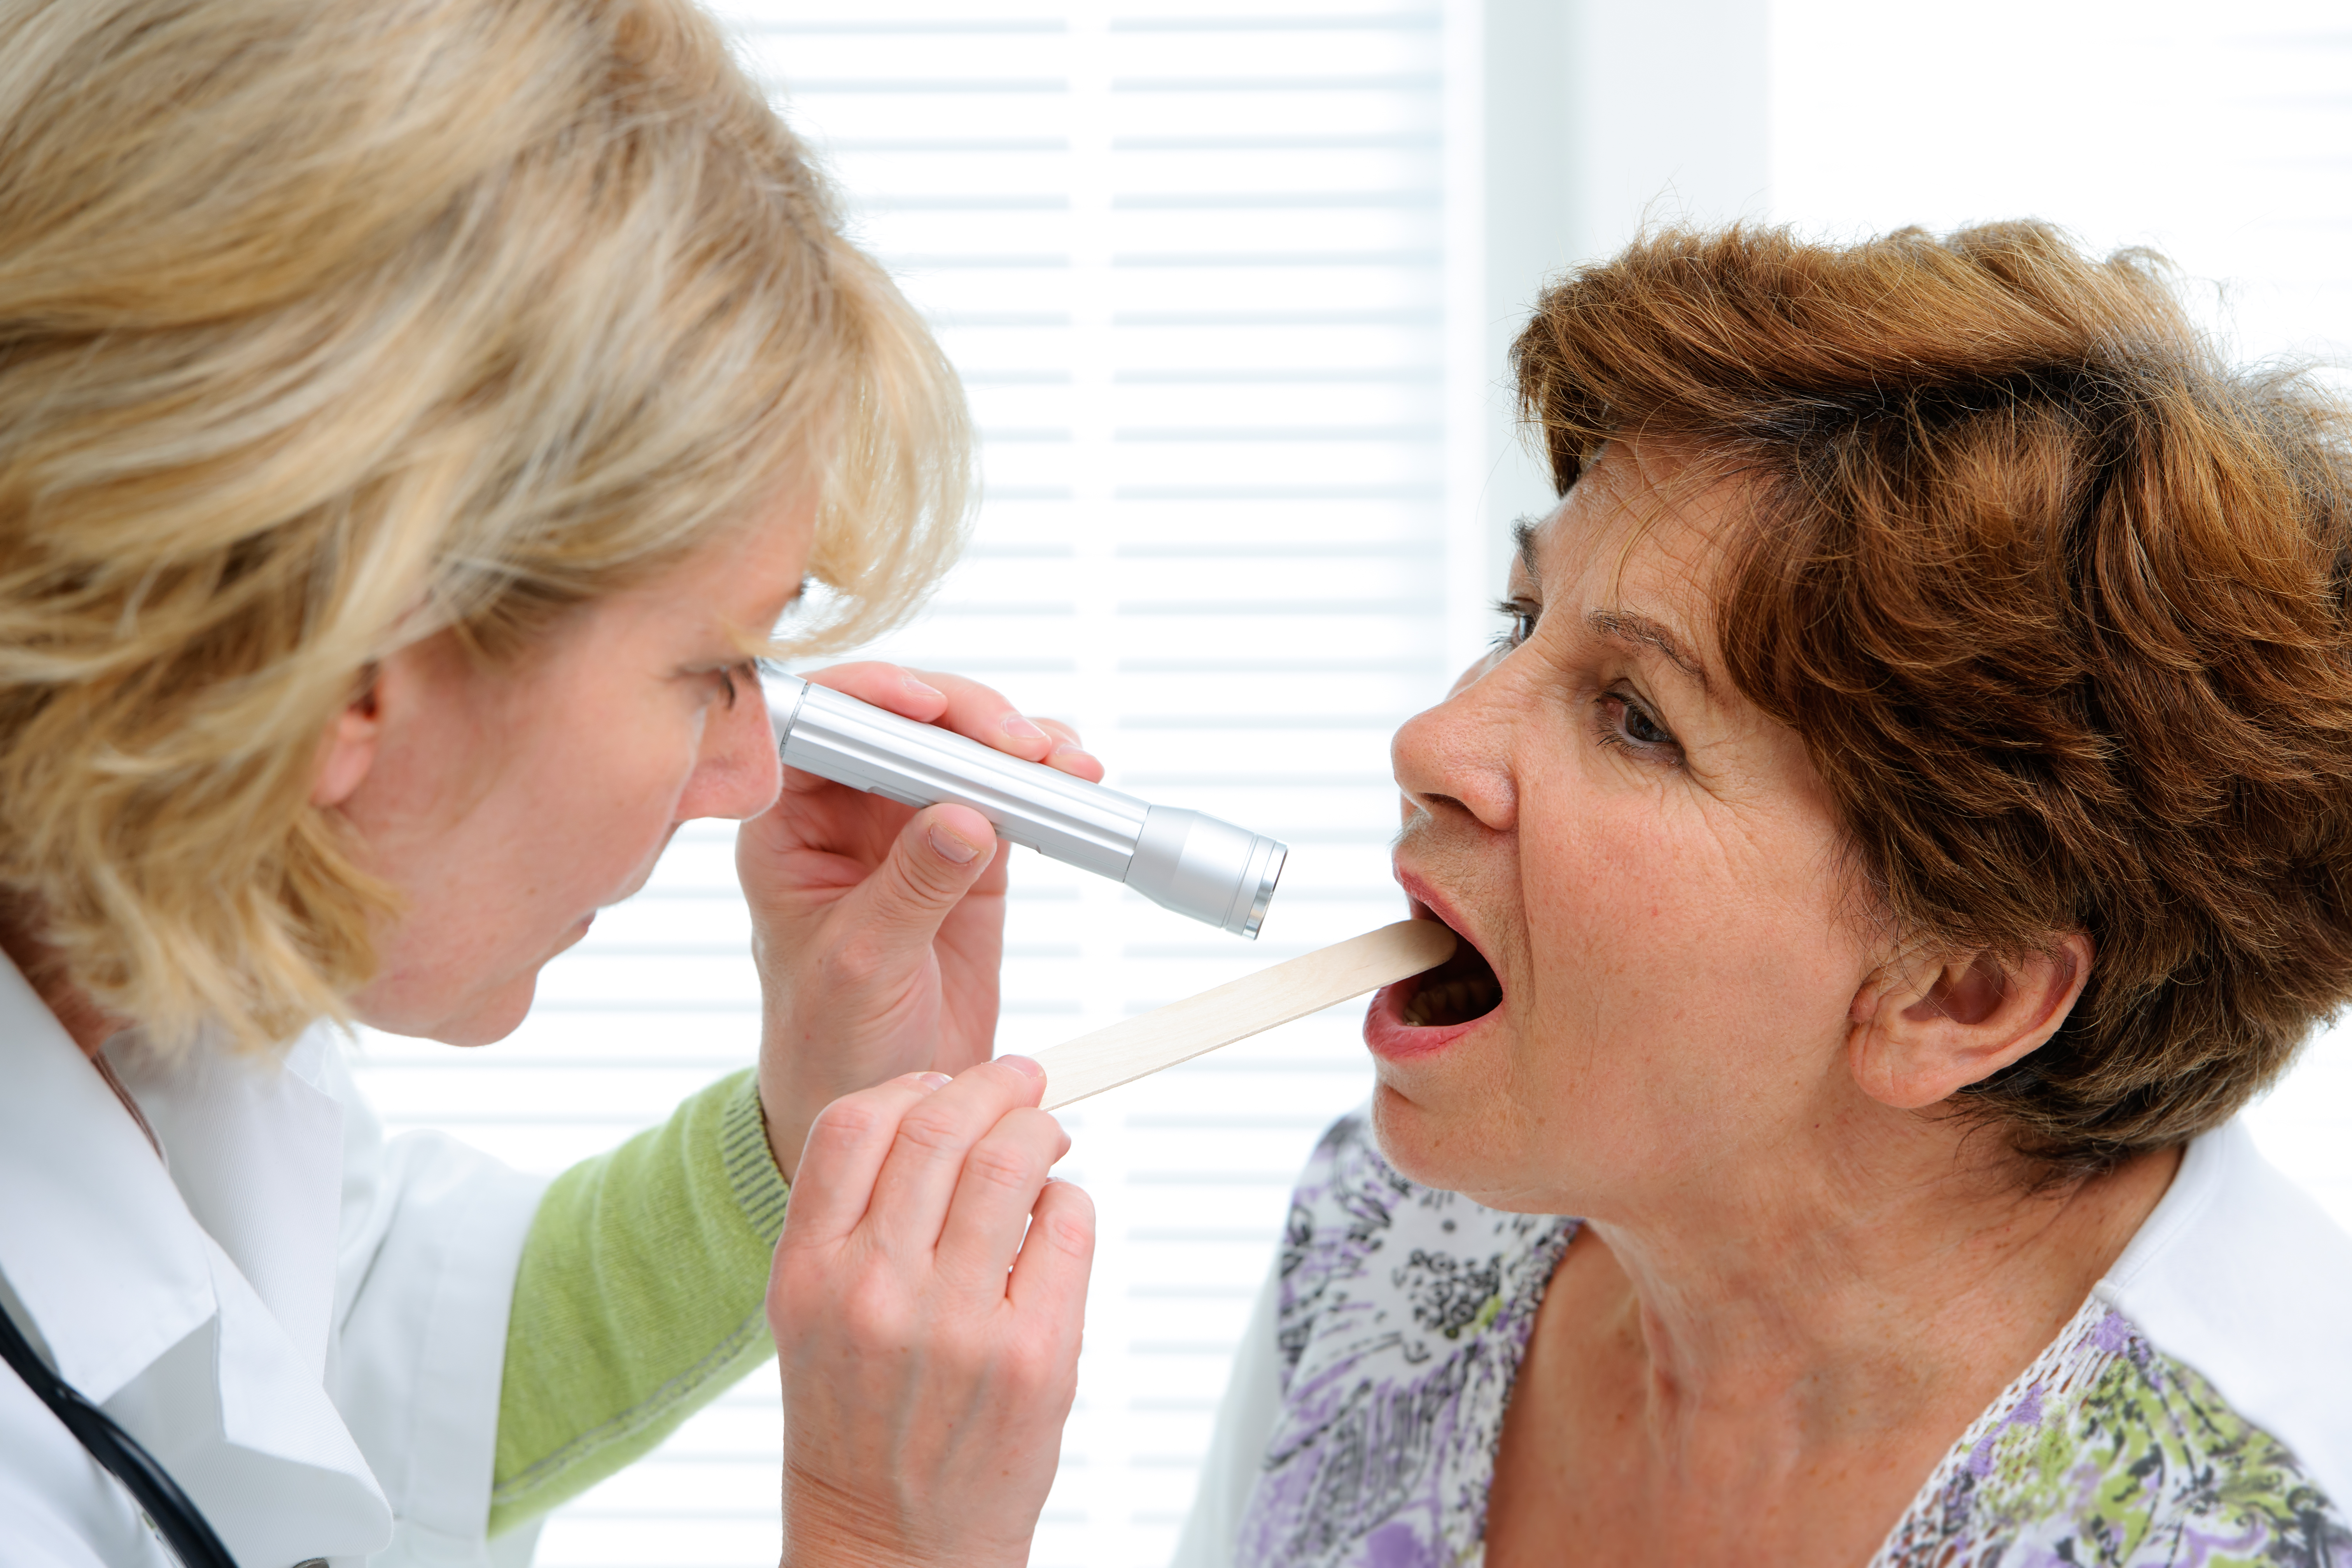 Can Sjogren’s Syndrome Cause a Metal Taste in the Mouth?